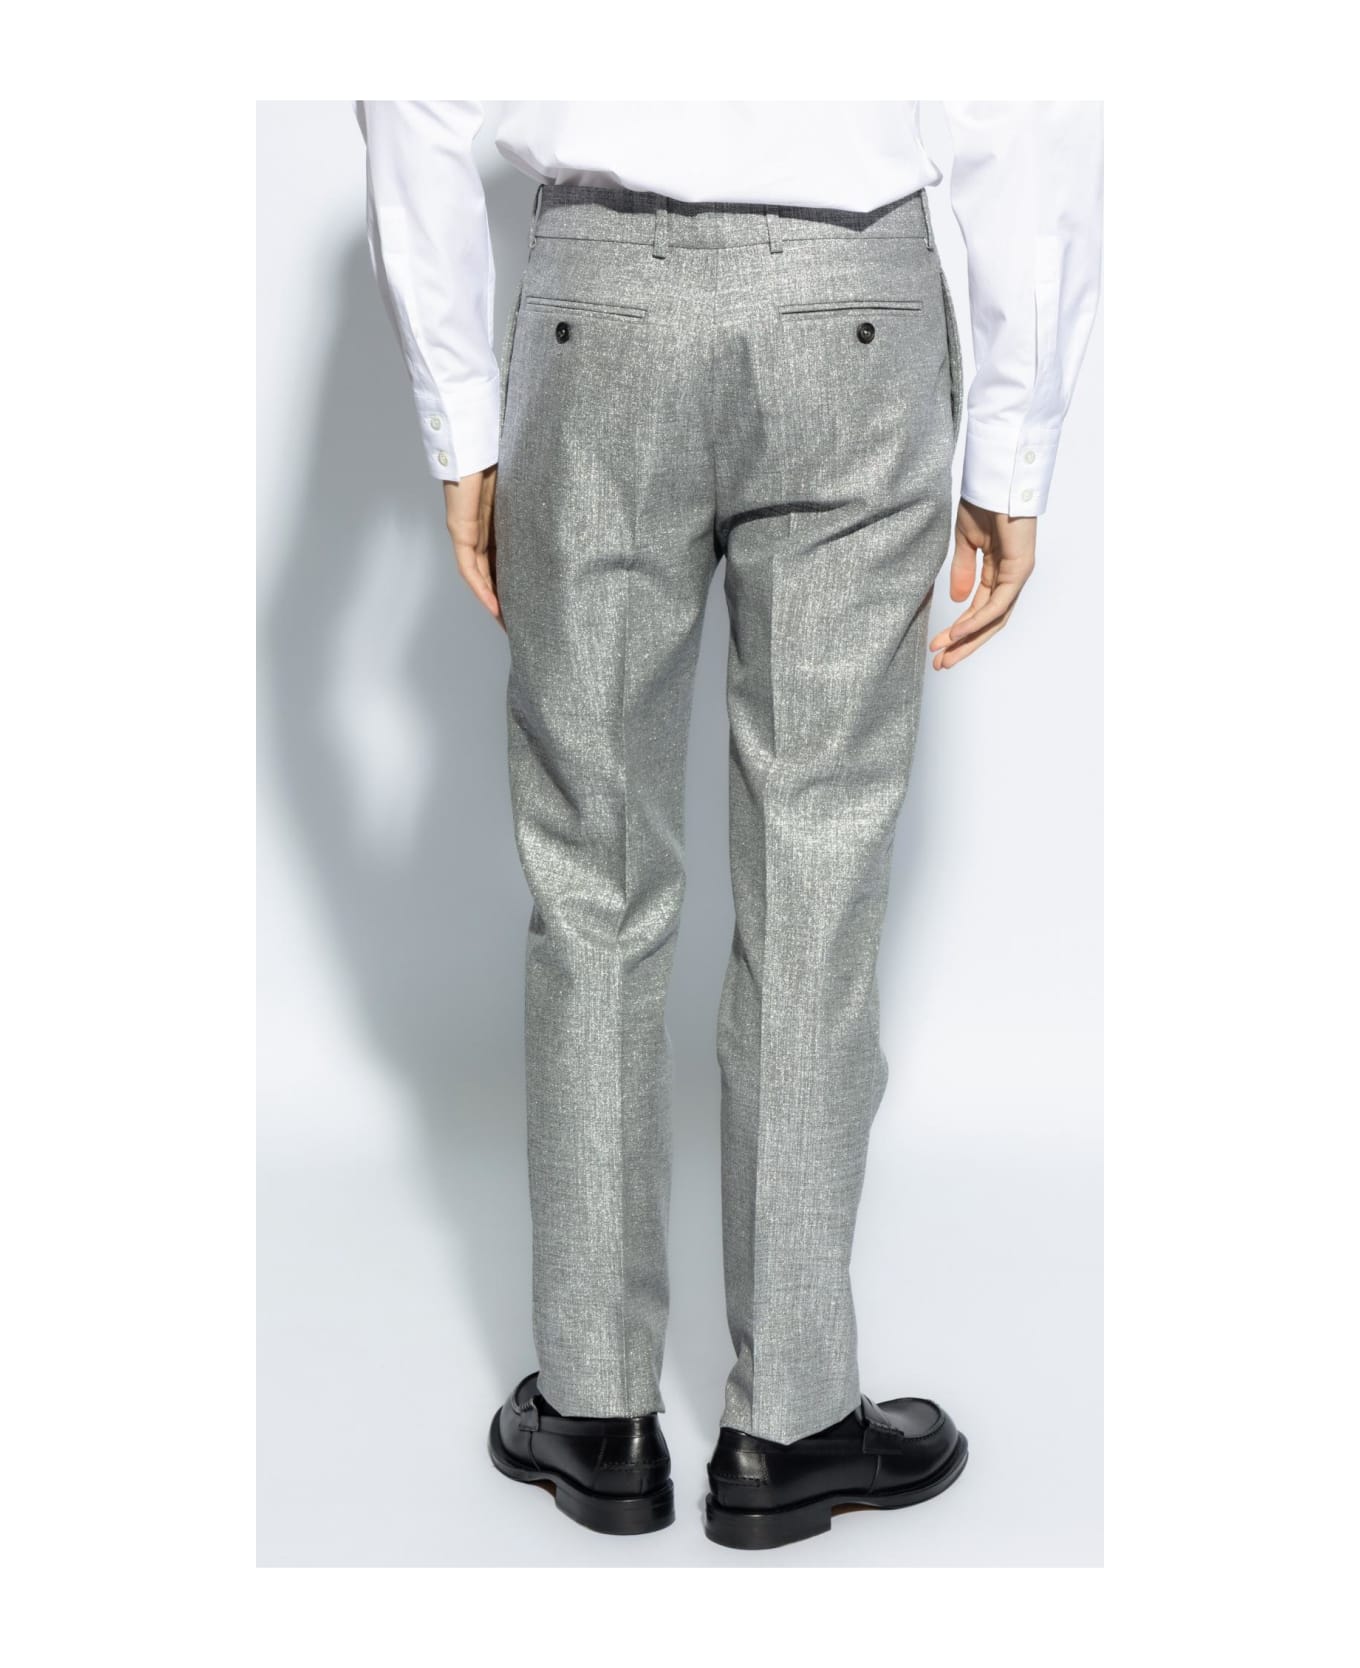 Alexander McQueen Creased Trousers - Silver ボトムス